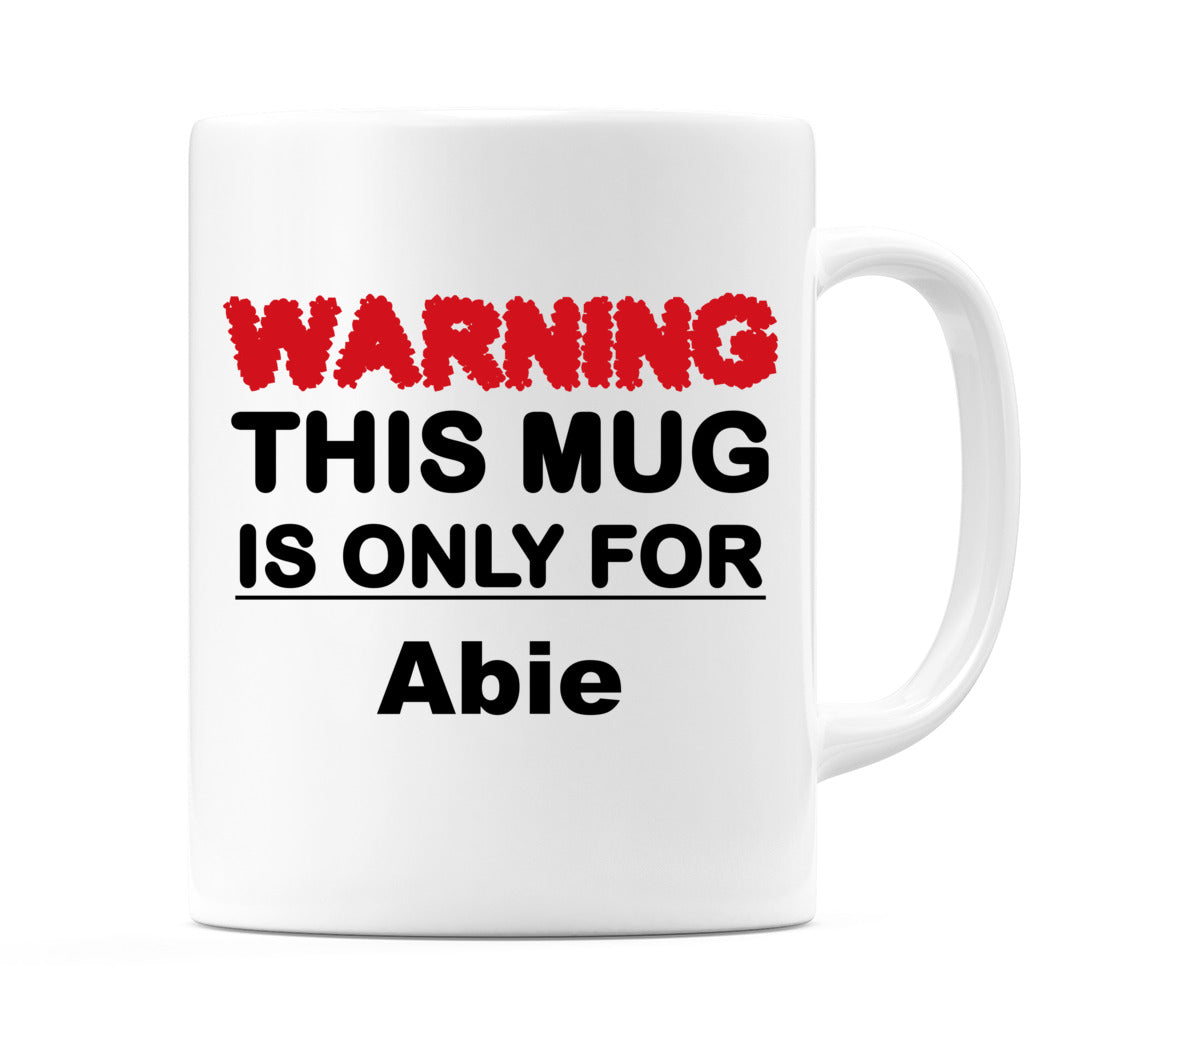 Warning This Mug is ONLY for Abie Mug